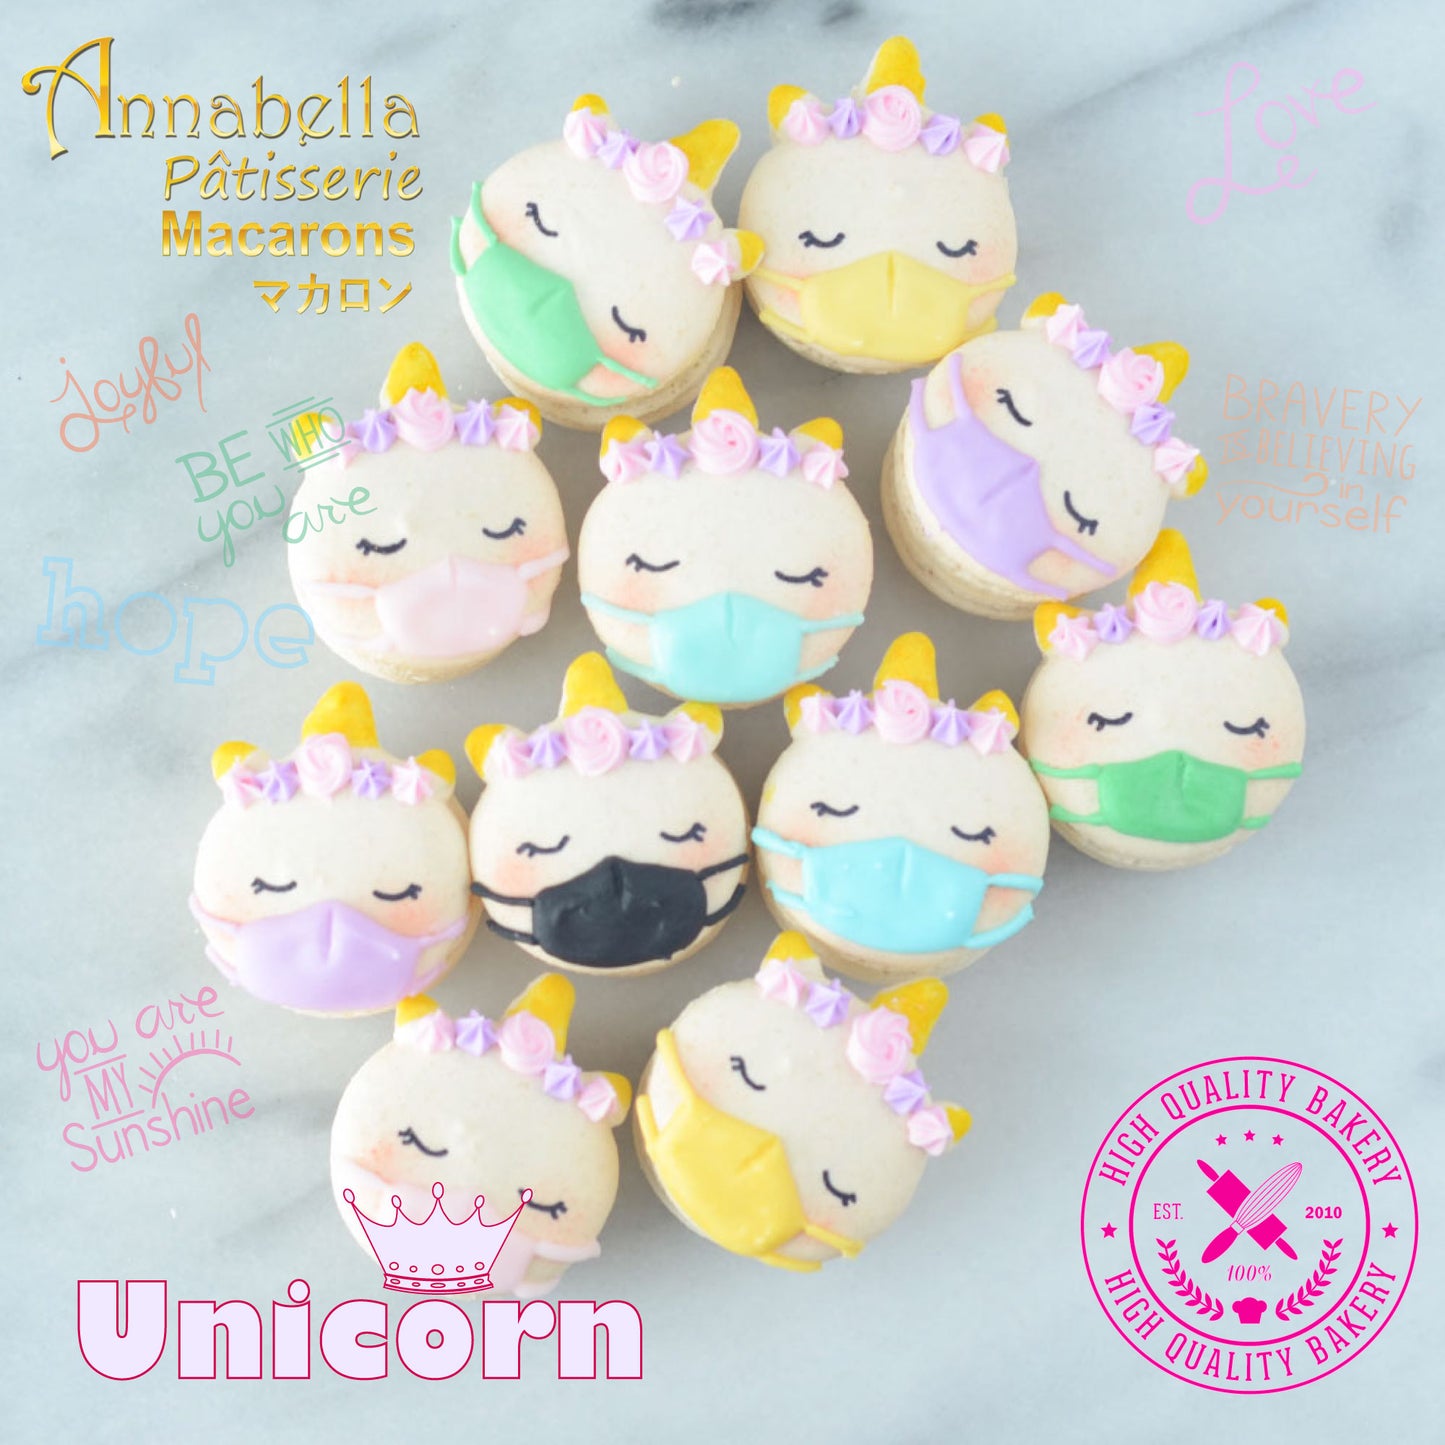 Unicorn Macaron Tower |  43pcs Macarons Total in a Tower | $138 Only